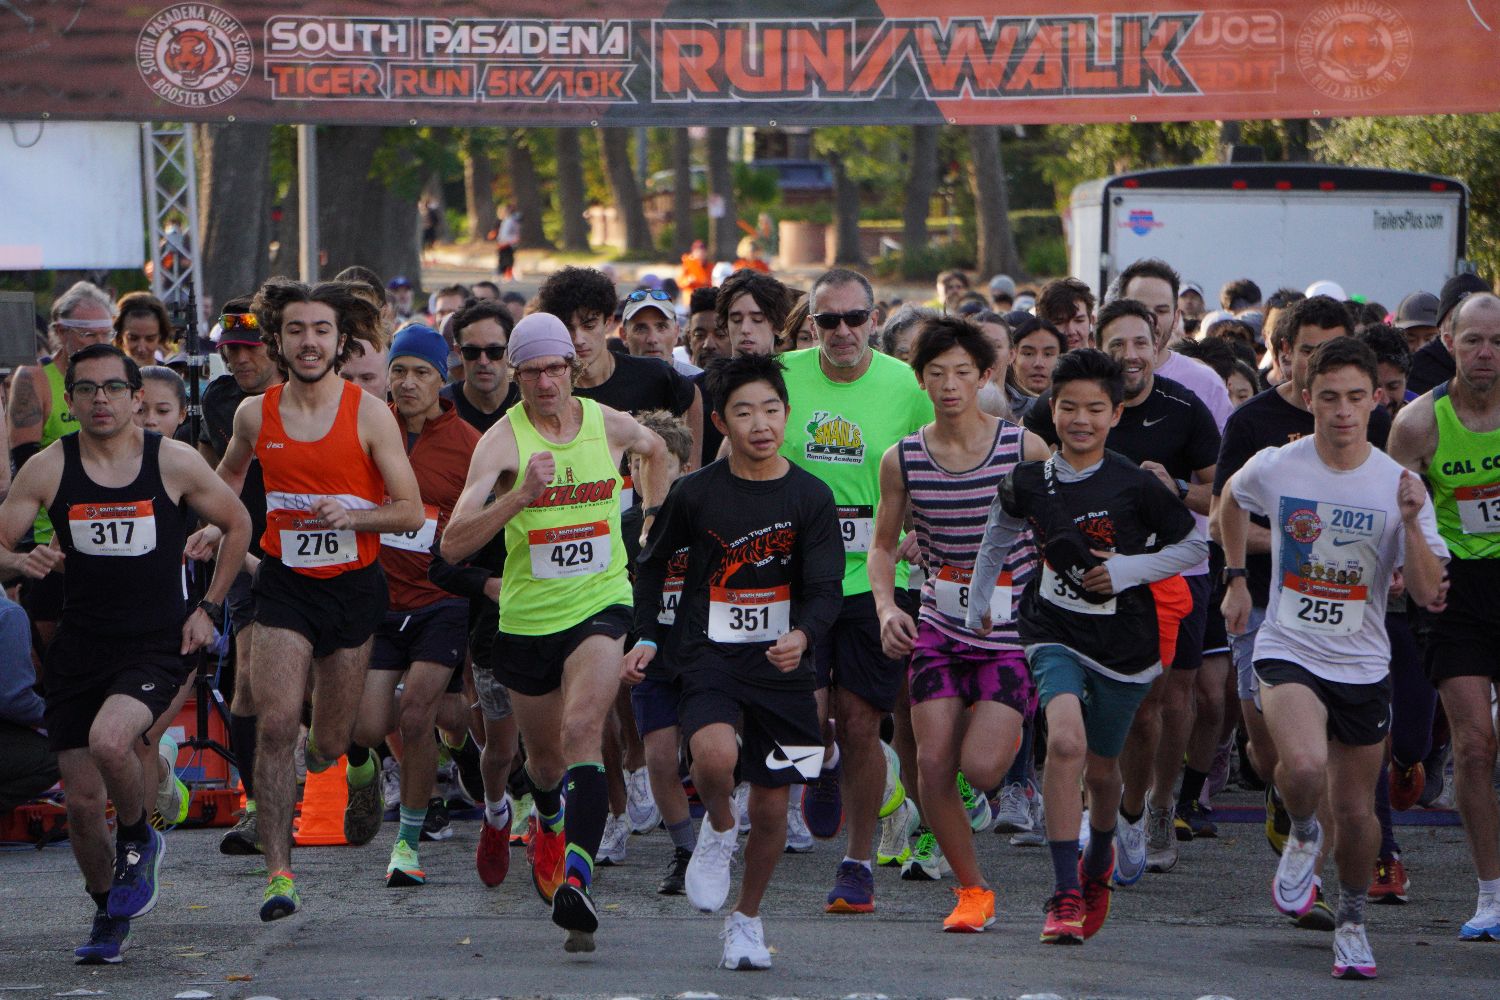 PHOTO: Eric Cuellar, SPHS ASB | South Pasadenan.com News | Hundreds ran through the streets of South Pasadena last Saturday in the 25th anniversary of the Tiger Run. The event supports the South Pasadena High Booster Club.